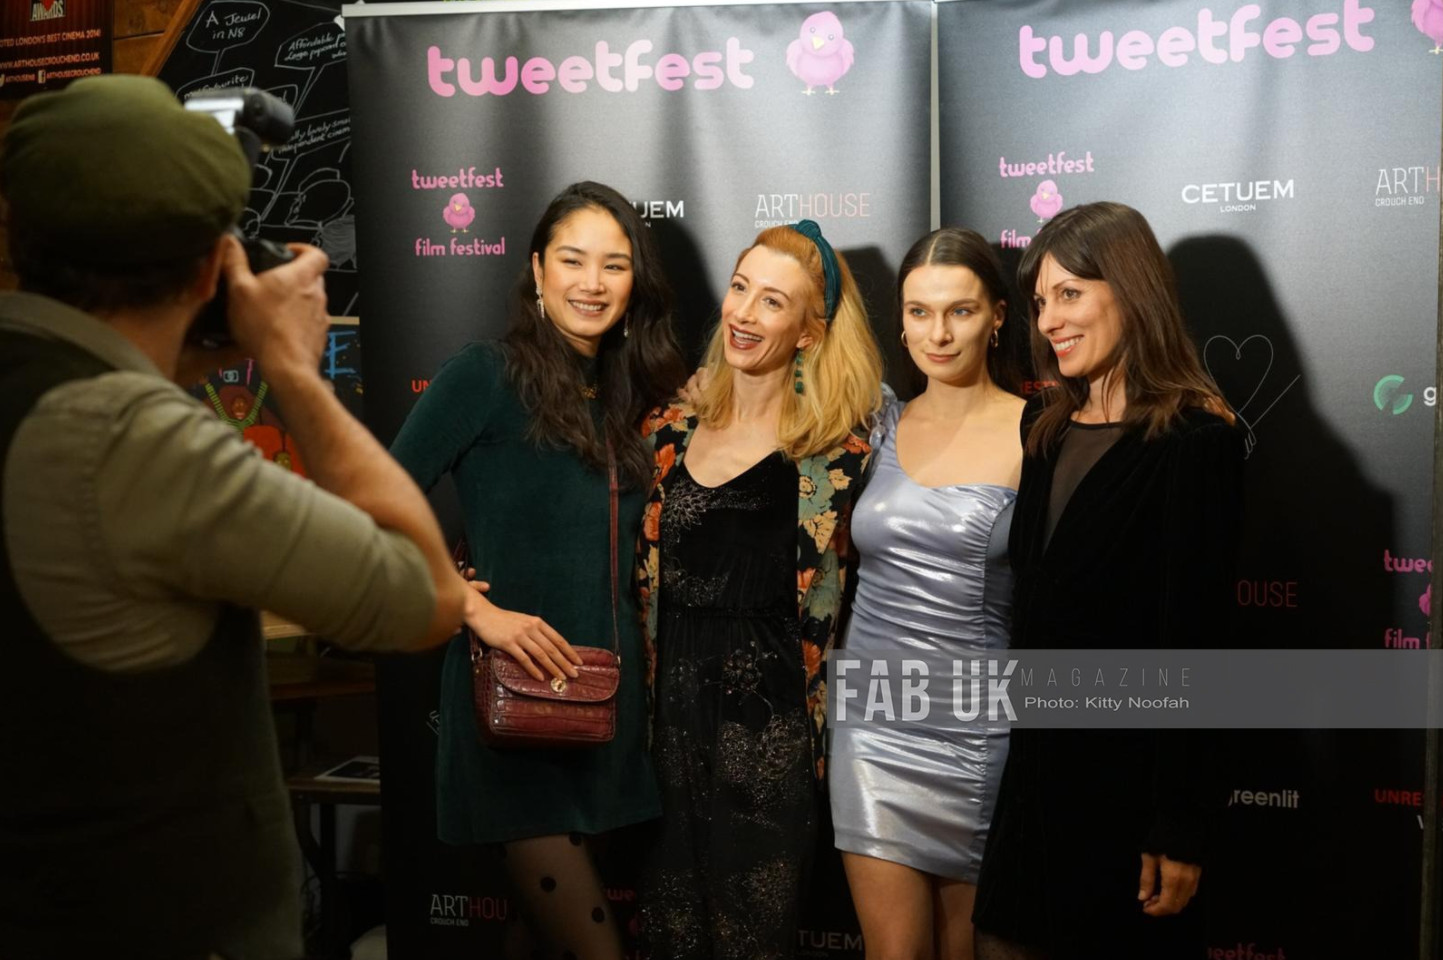 Tweetfest dazzled the audience with its 7th year event at the arthouse cinema